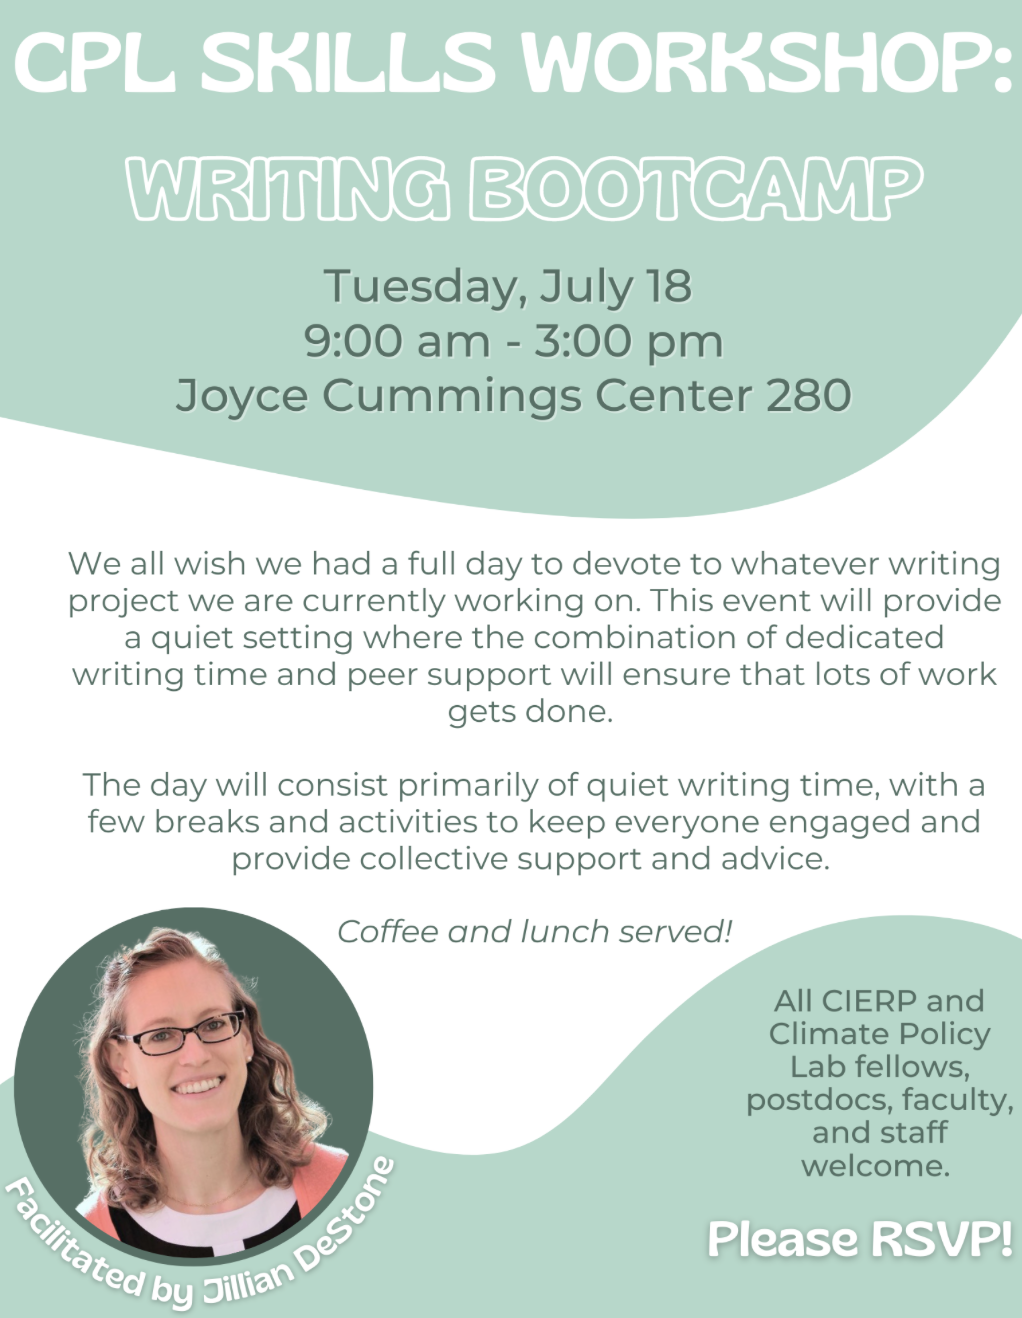 Leadership Bootcamp 2021 for Women in Ministry with Becky